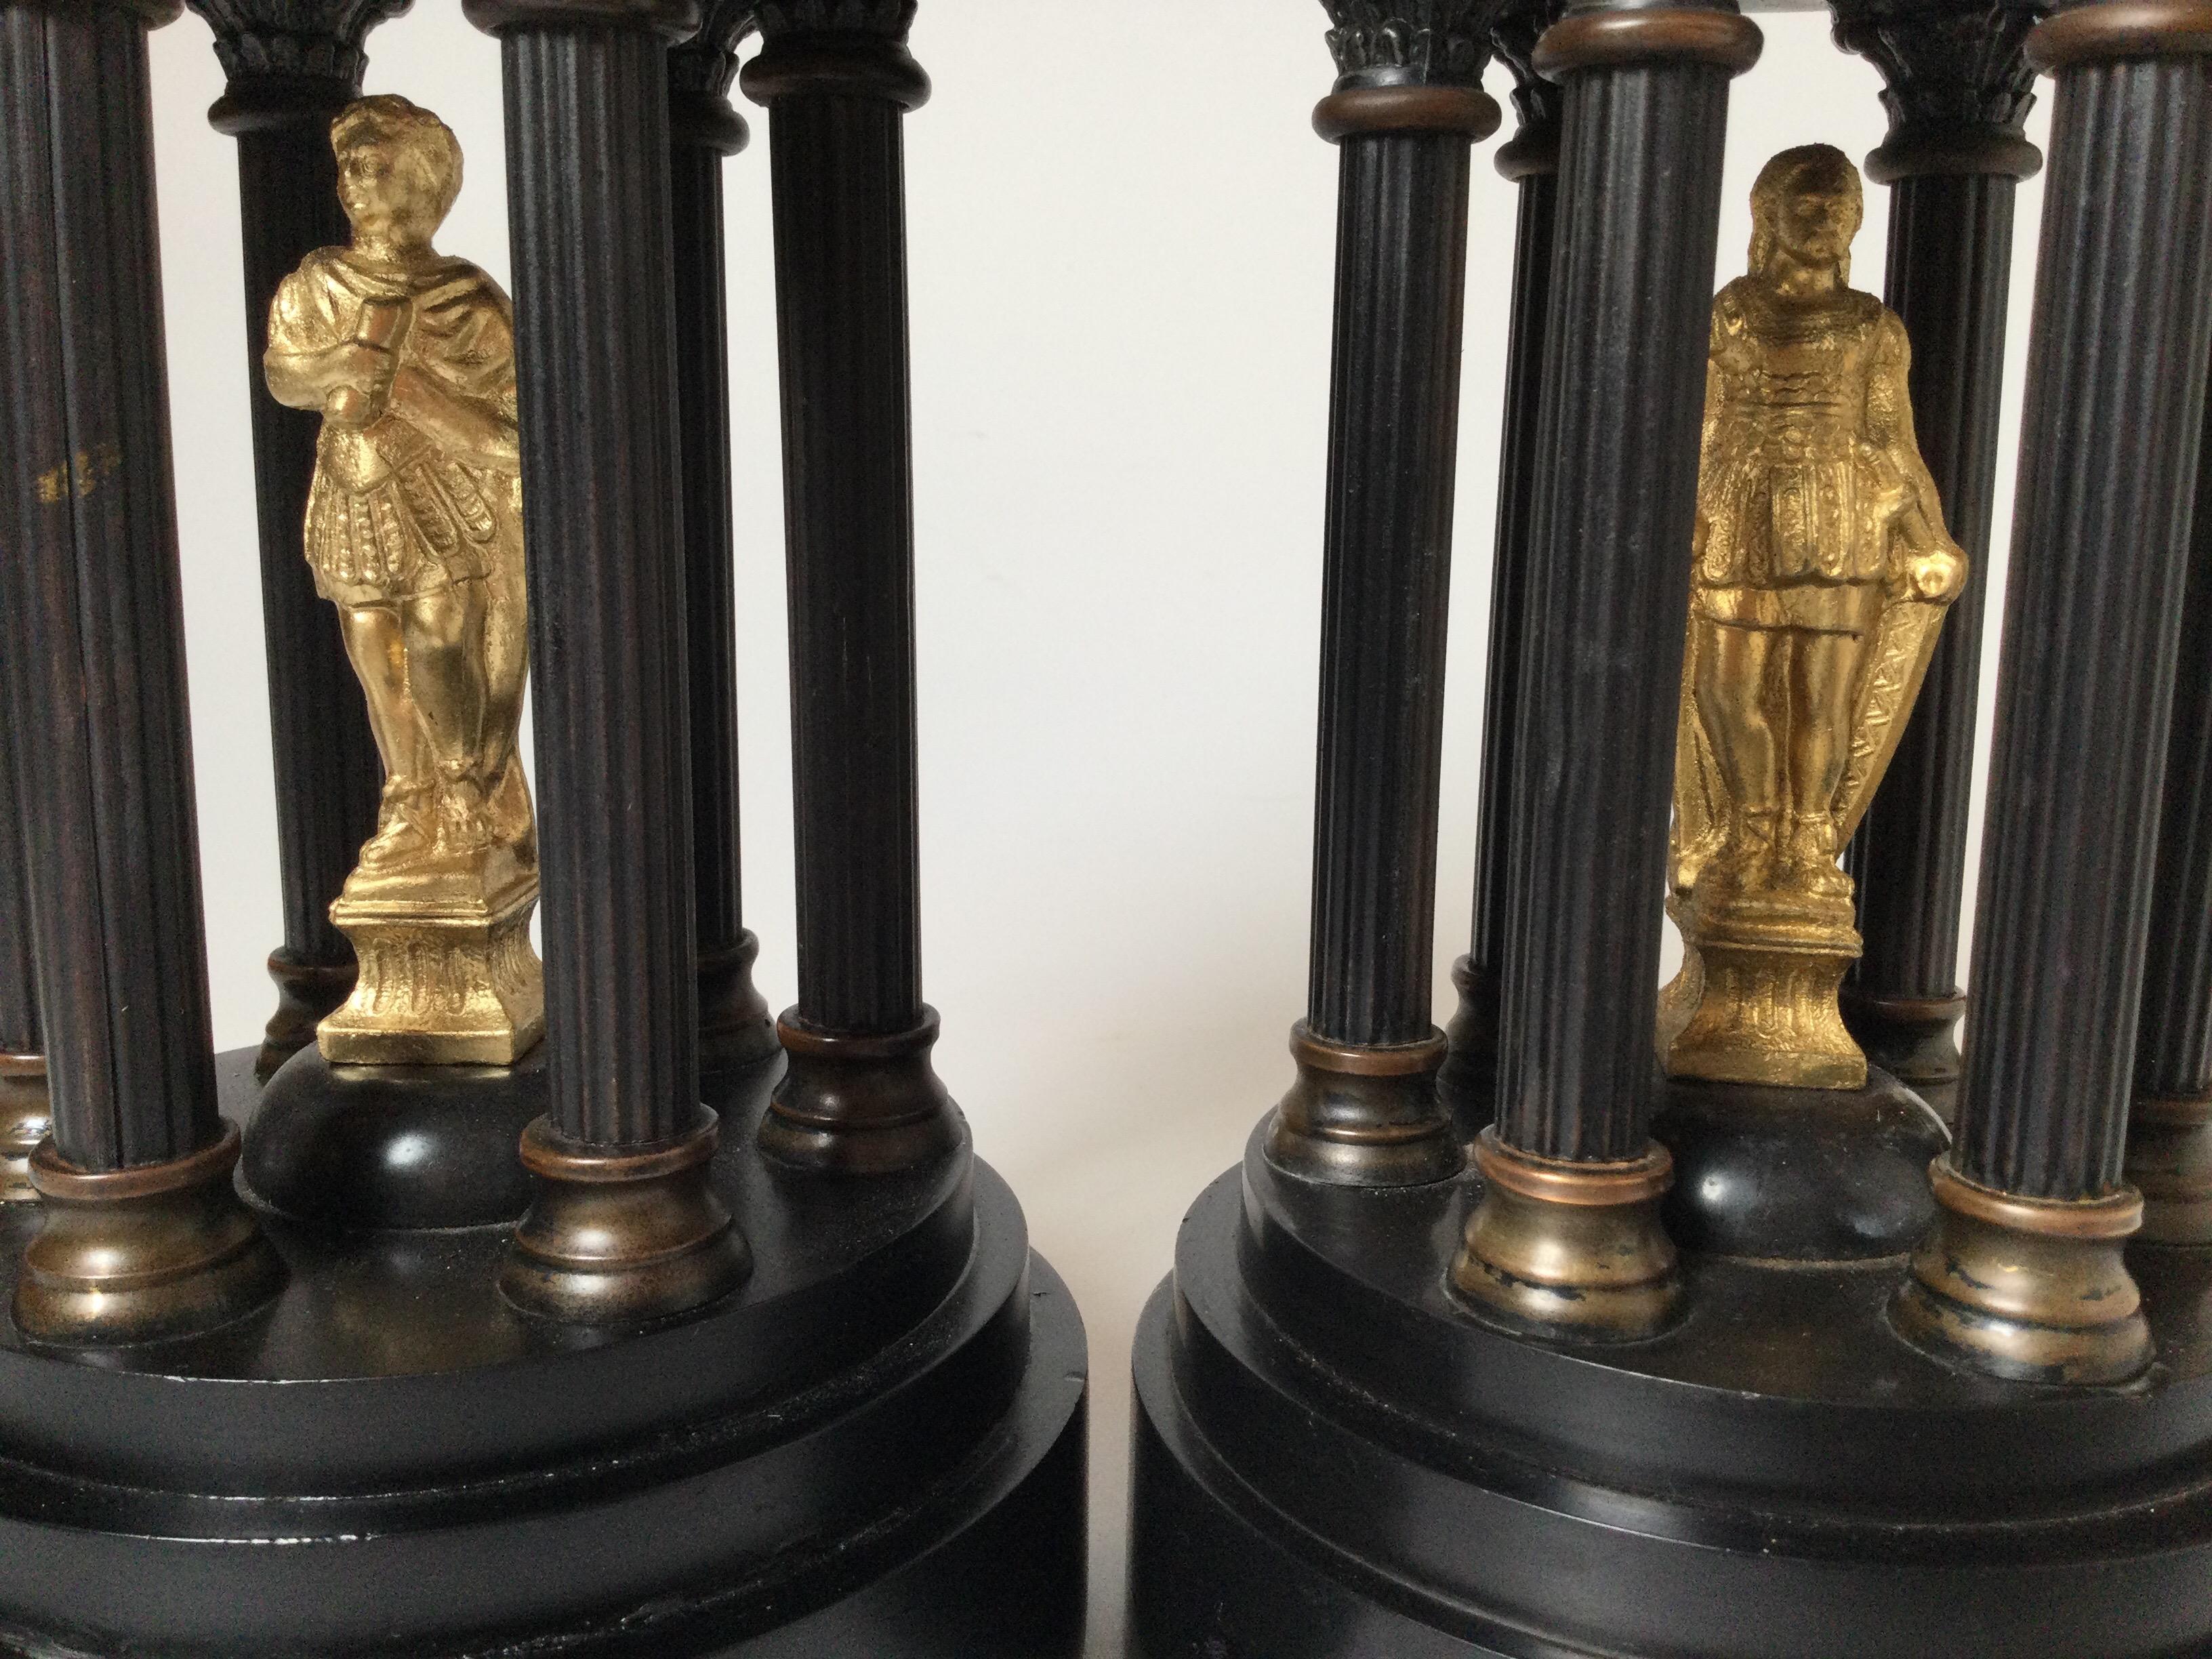 The round Neoclassical garnitures with columns surrounding a gilt bronze center figure. The rounded top with high finial. some slight chipping on the edge of one.